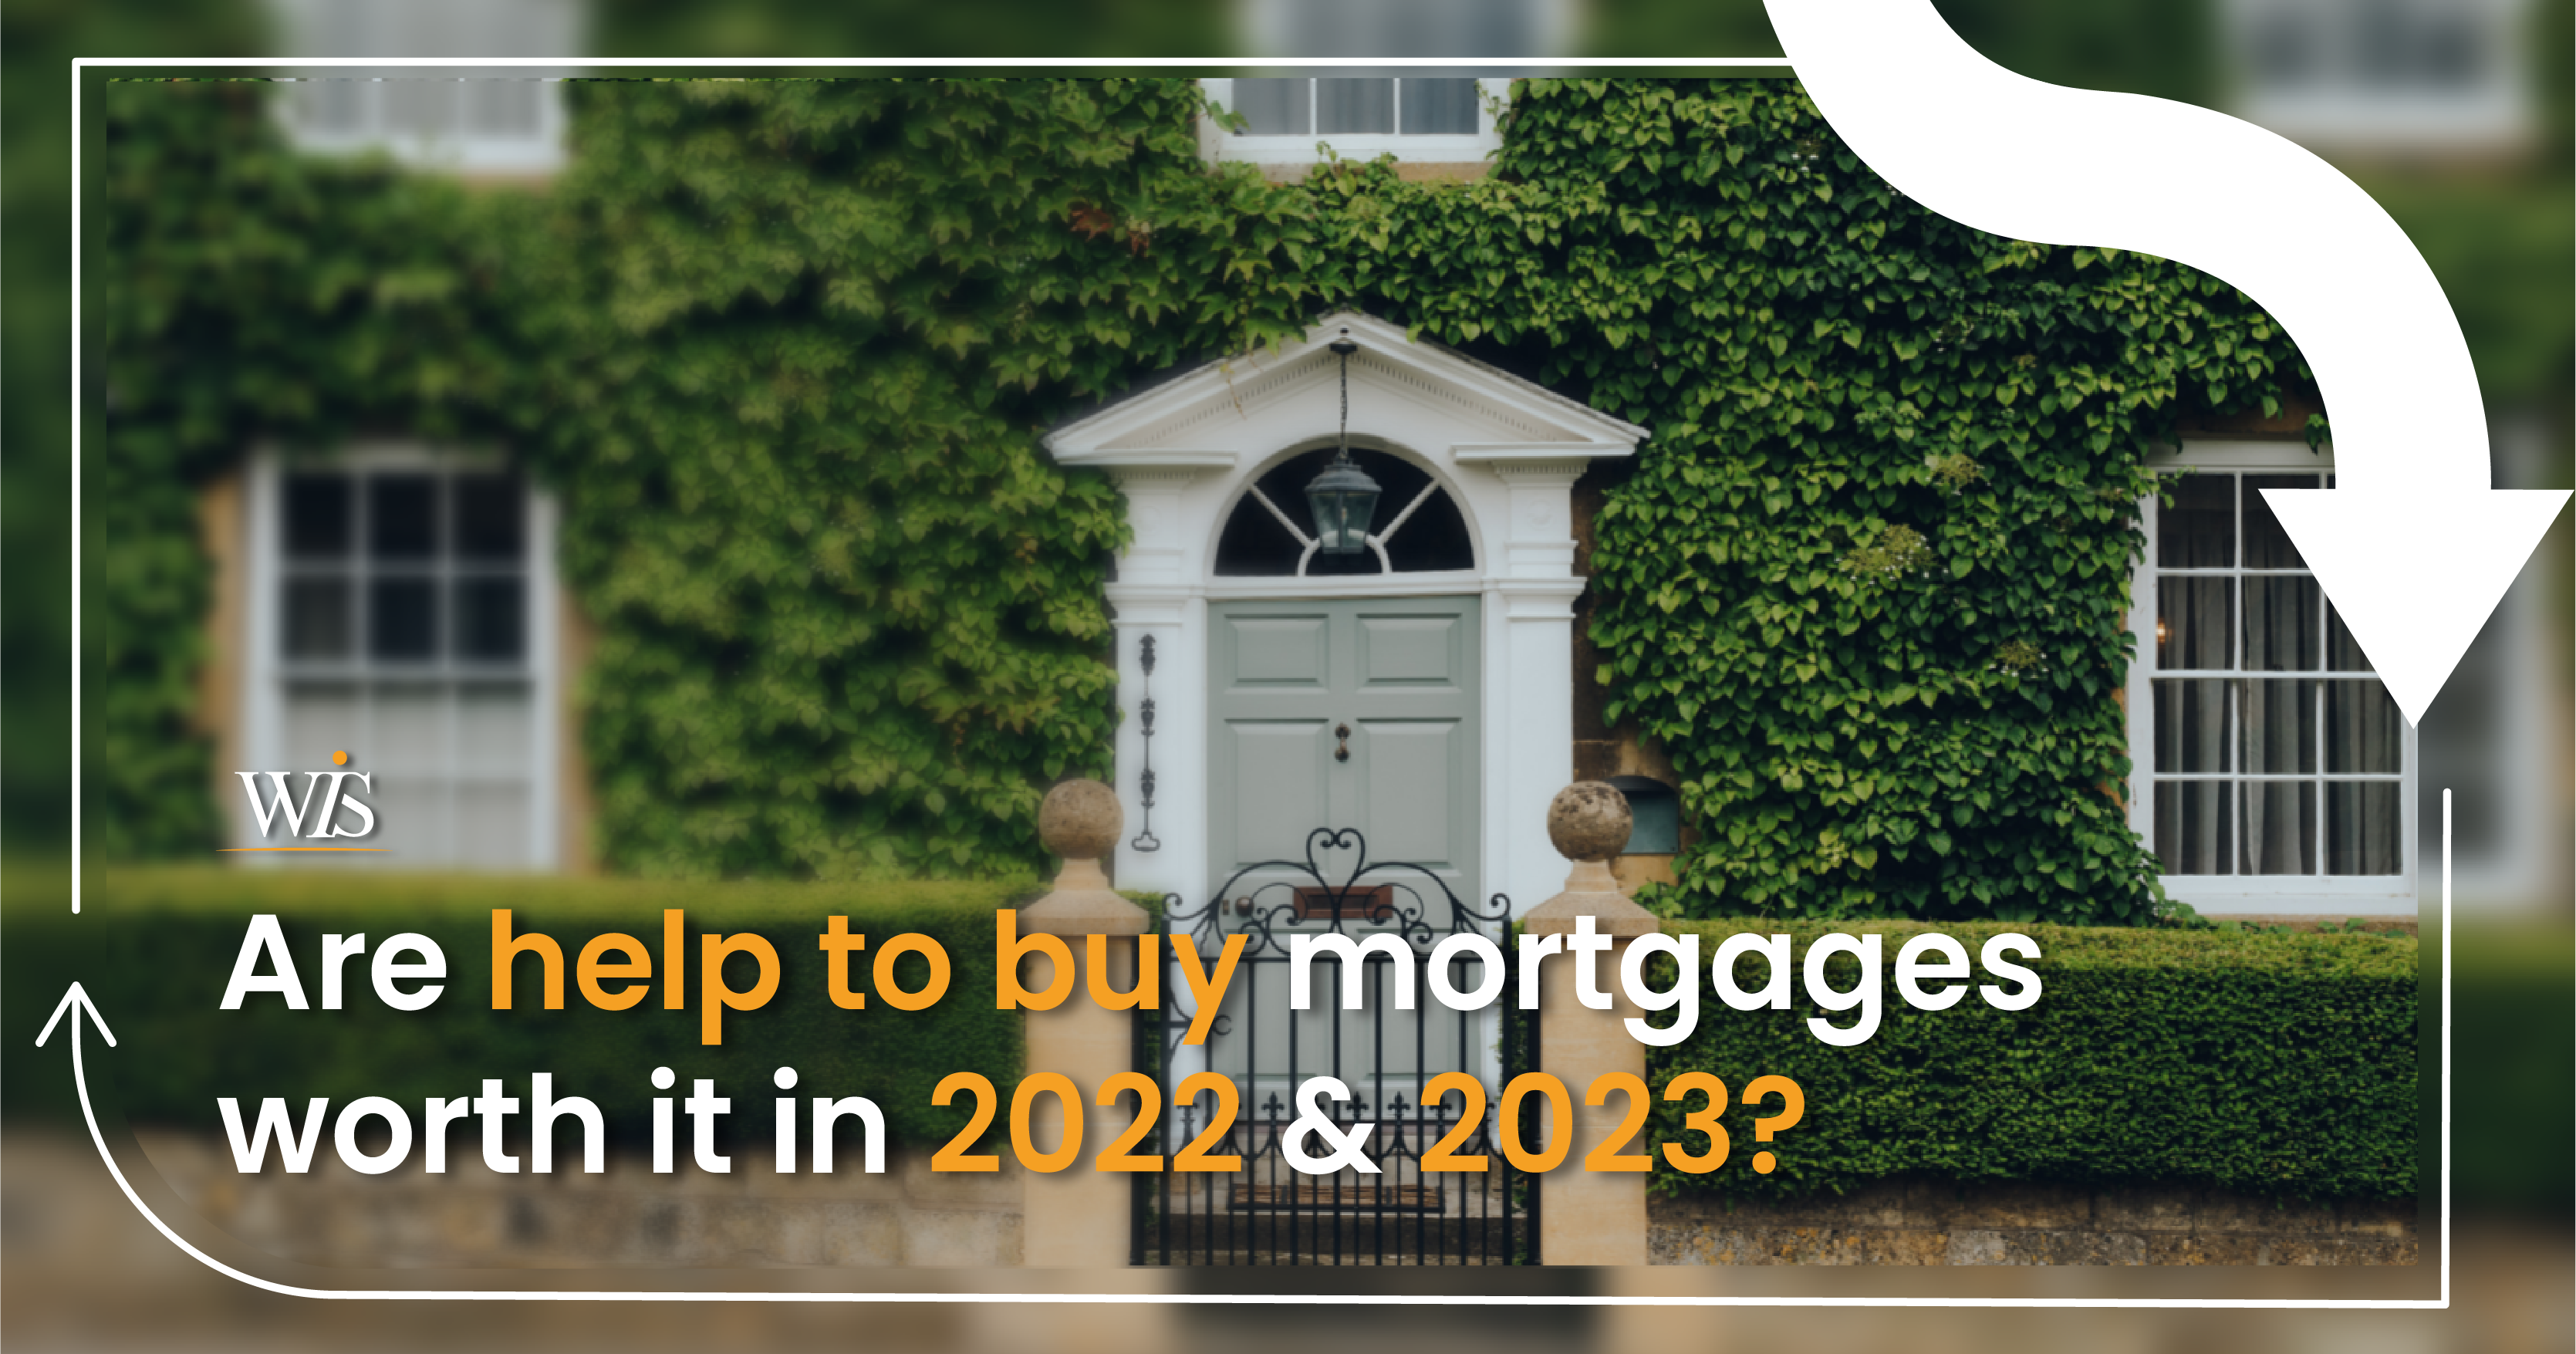 Are help to buy mortgages worth it for 2022 and 2023? image